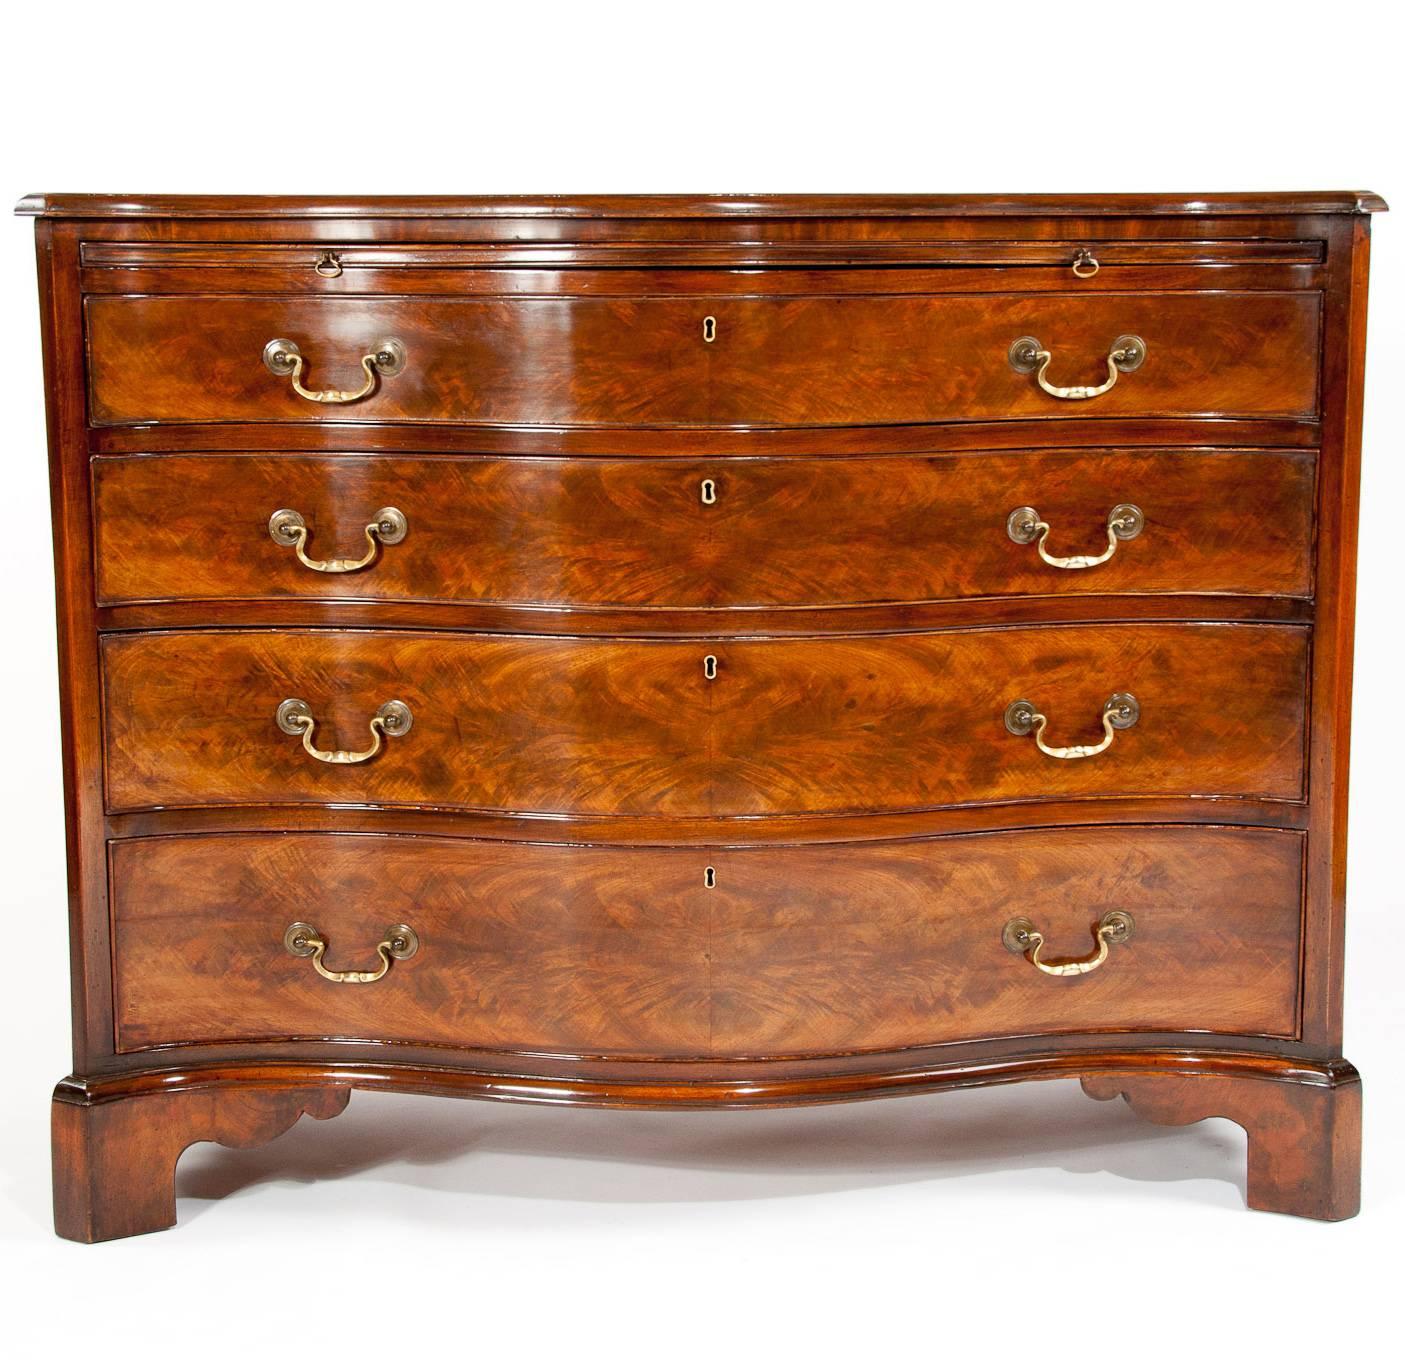 19th Century Antique Flame Mahogany Serpentine Shaped Chest